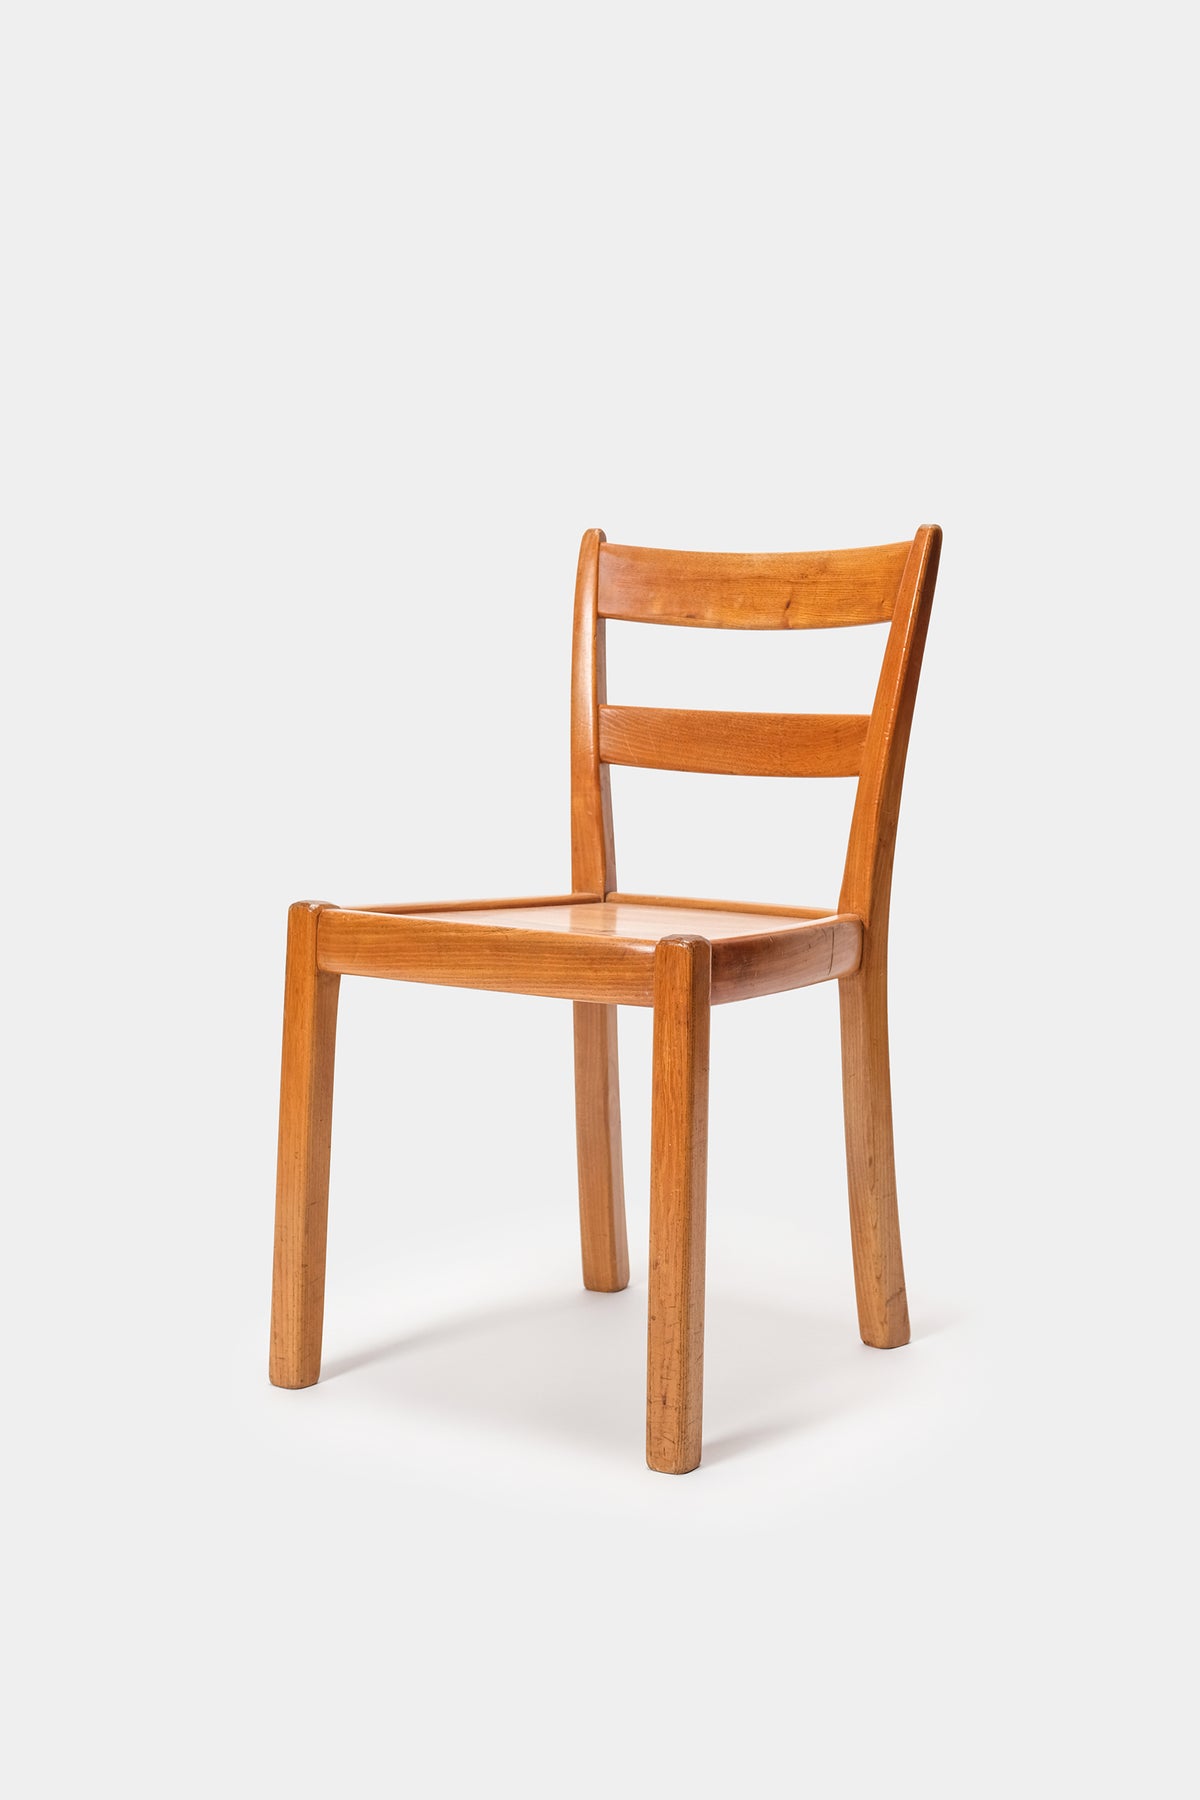 Franz Xaver Sproll, Chair made by hand, 40s